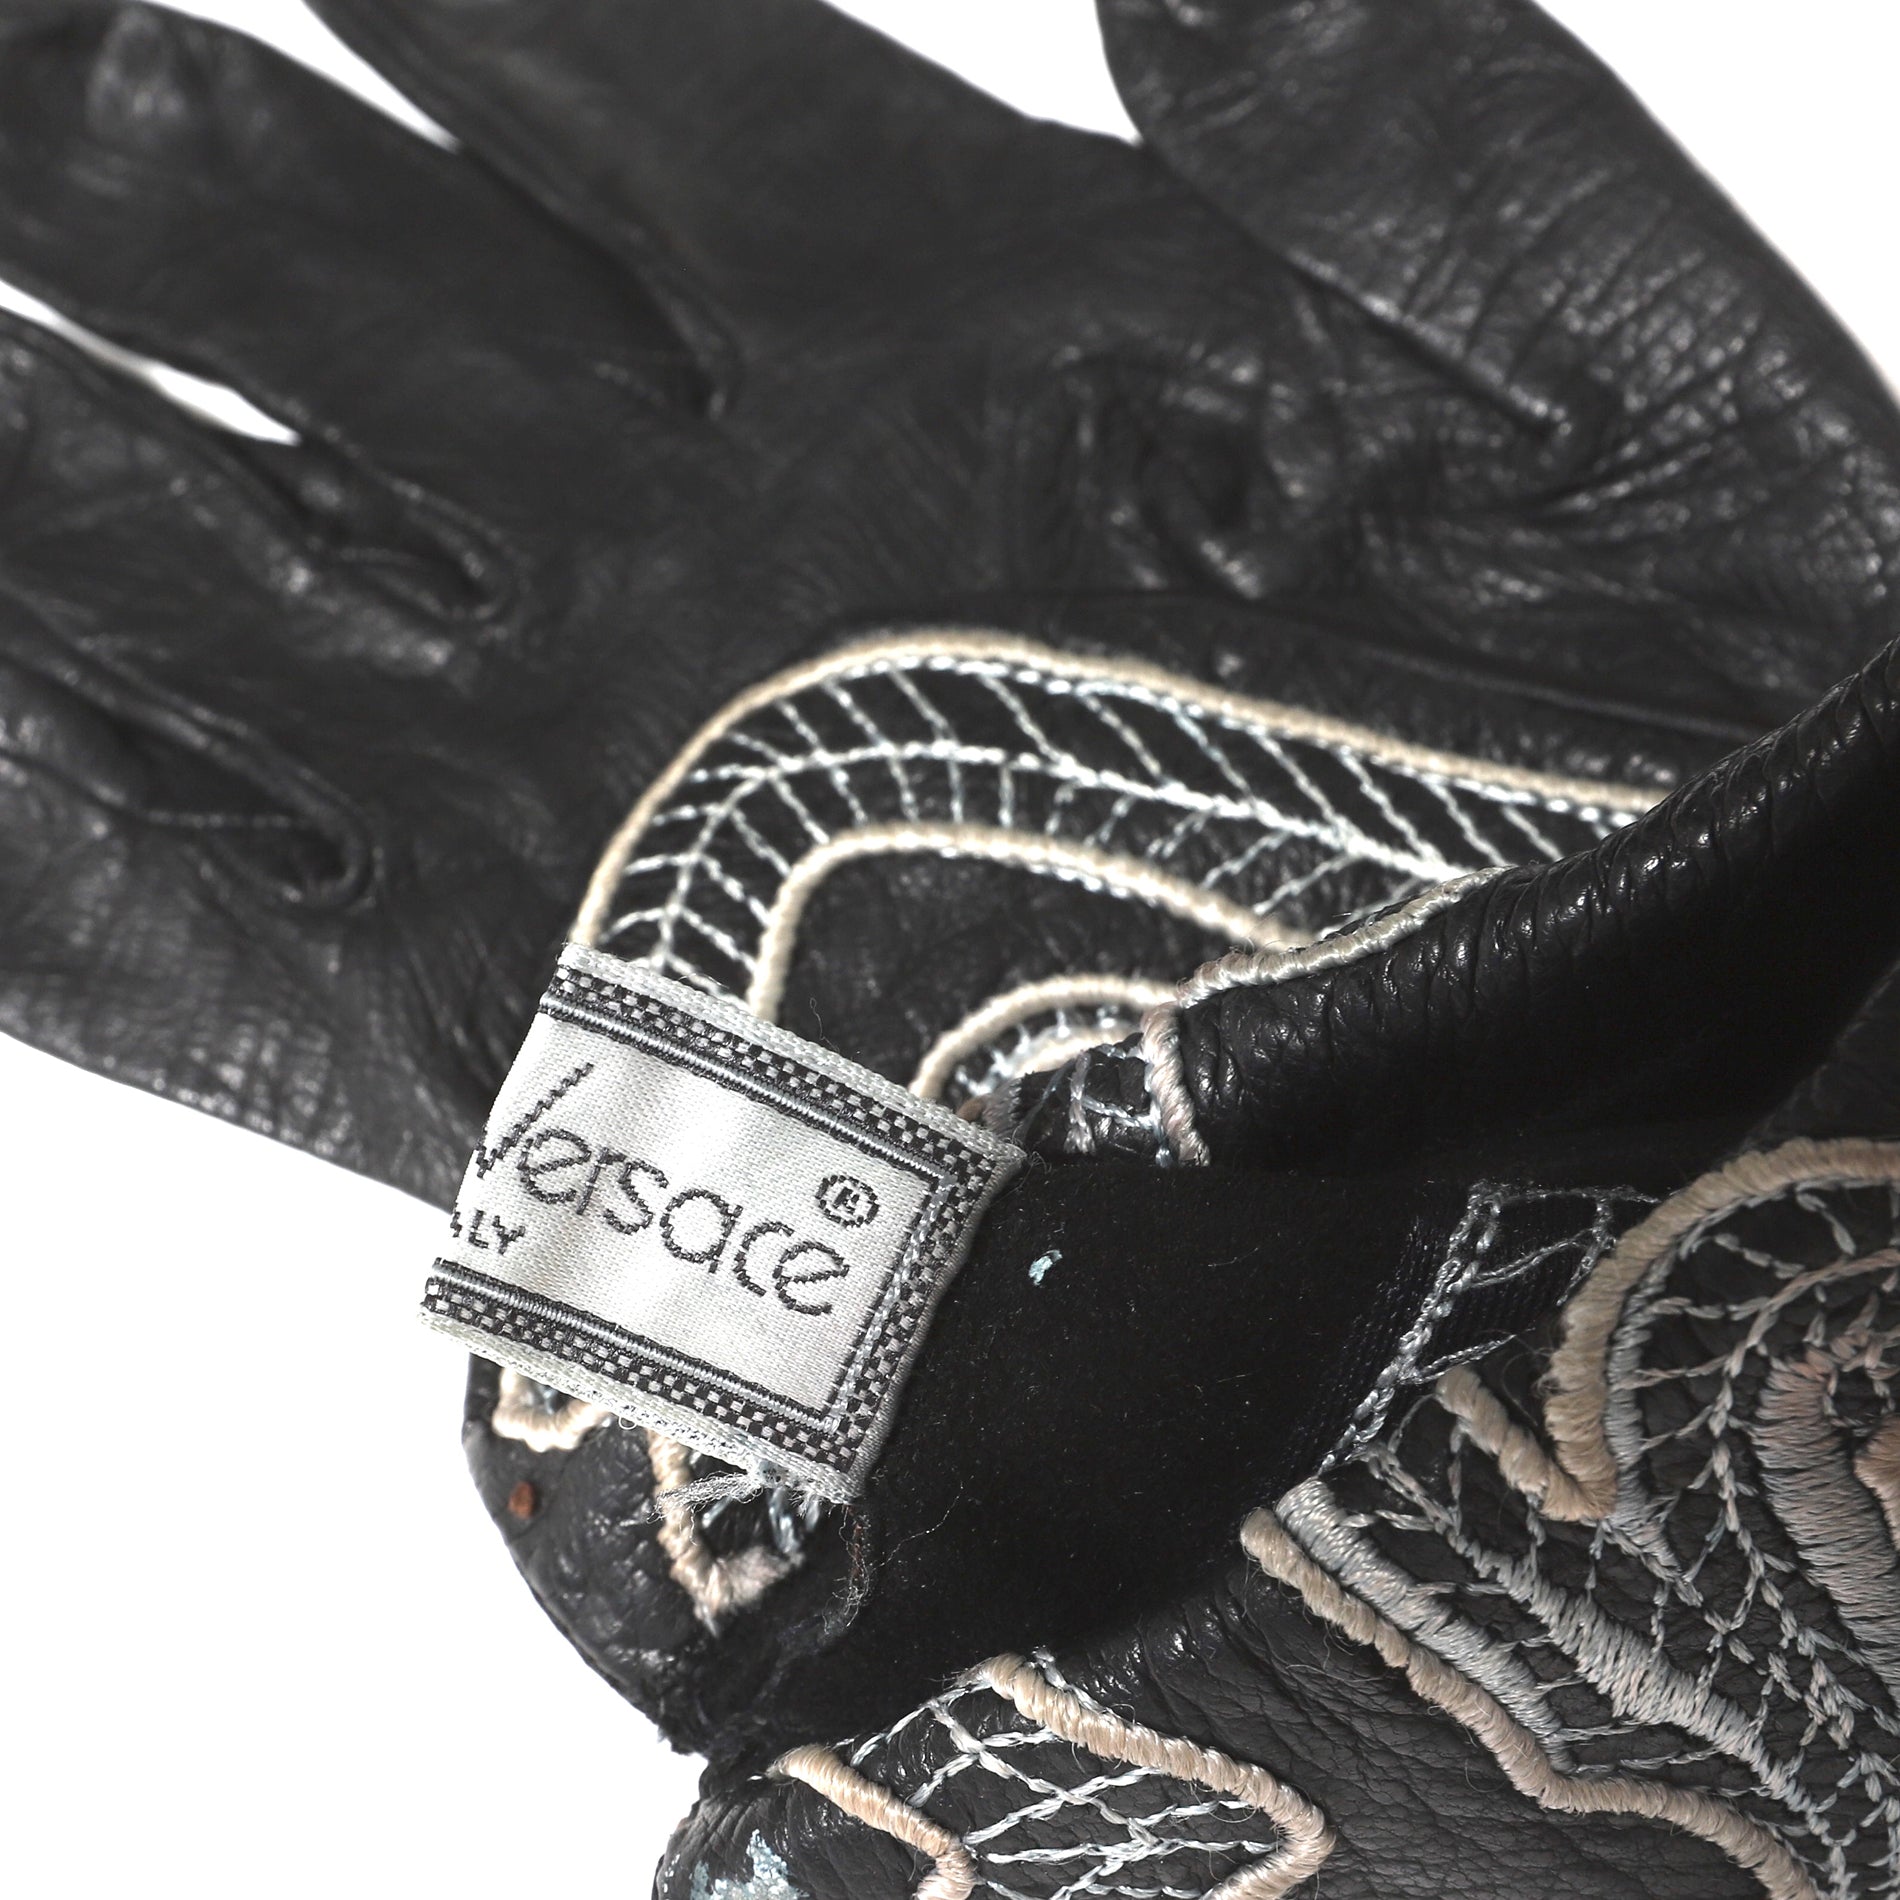 Gianni Versace 80s Embroidered Leather Gloves